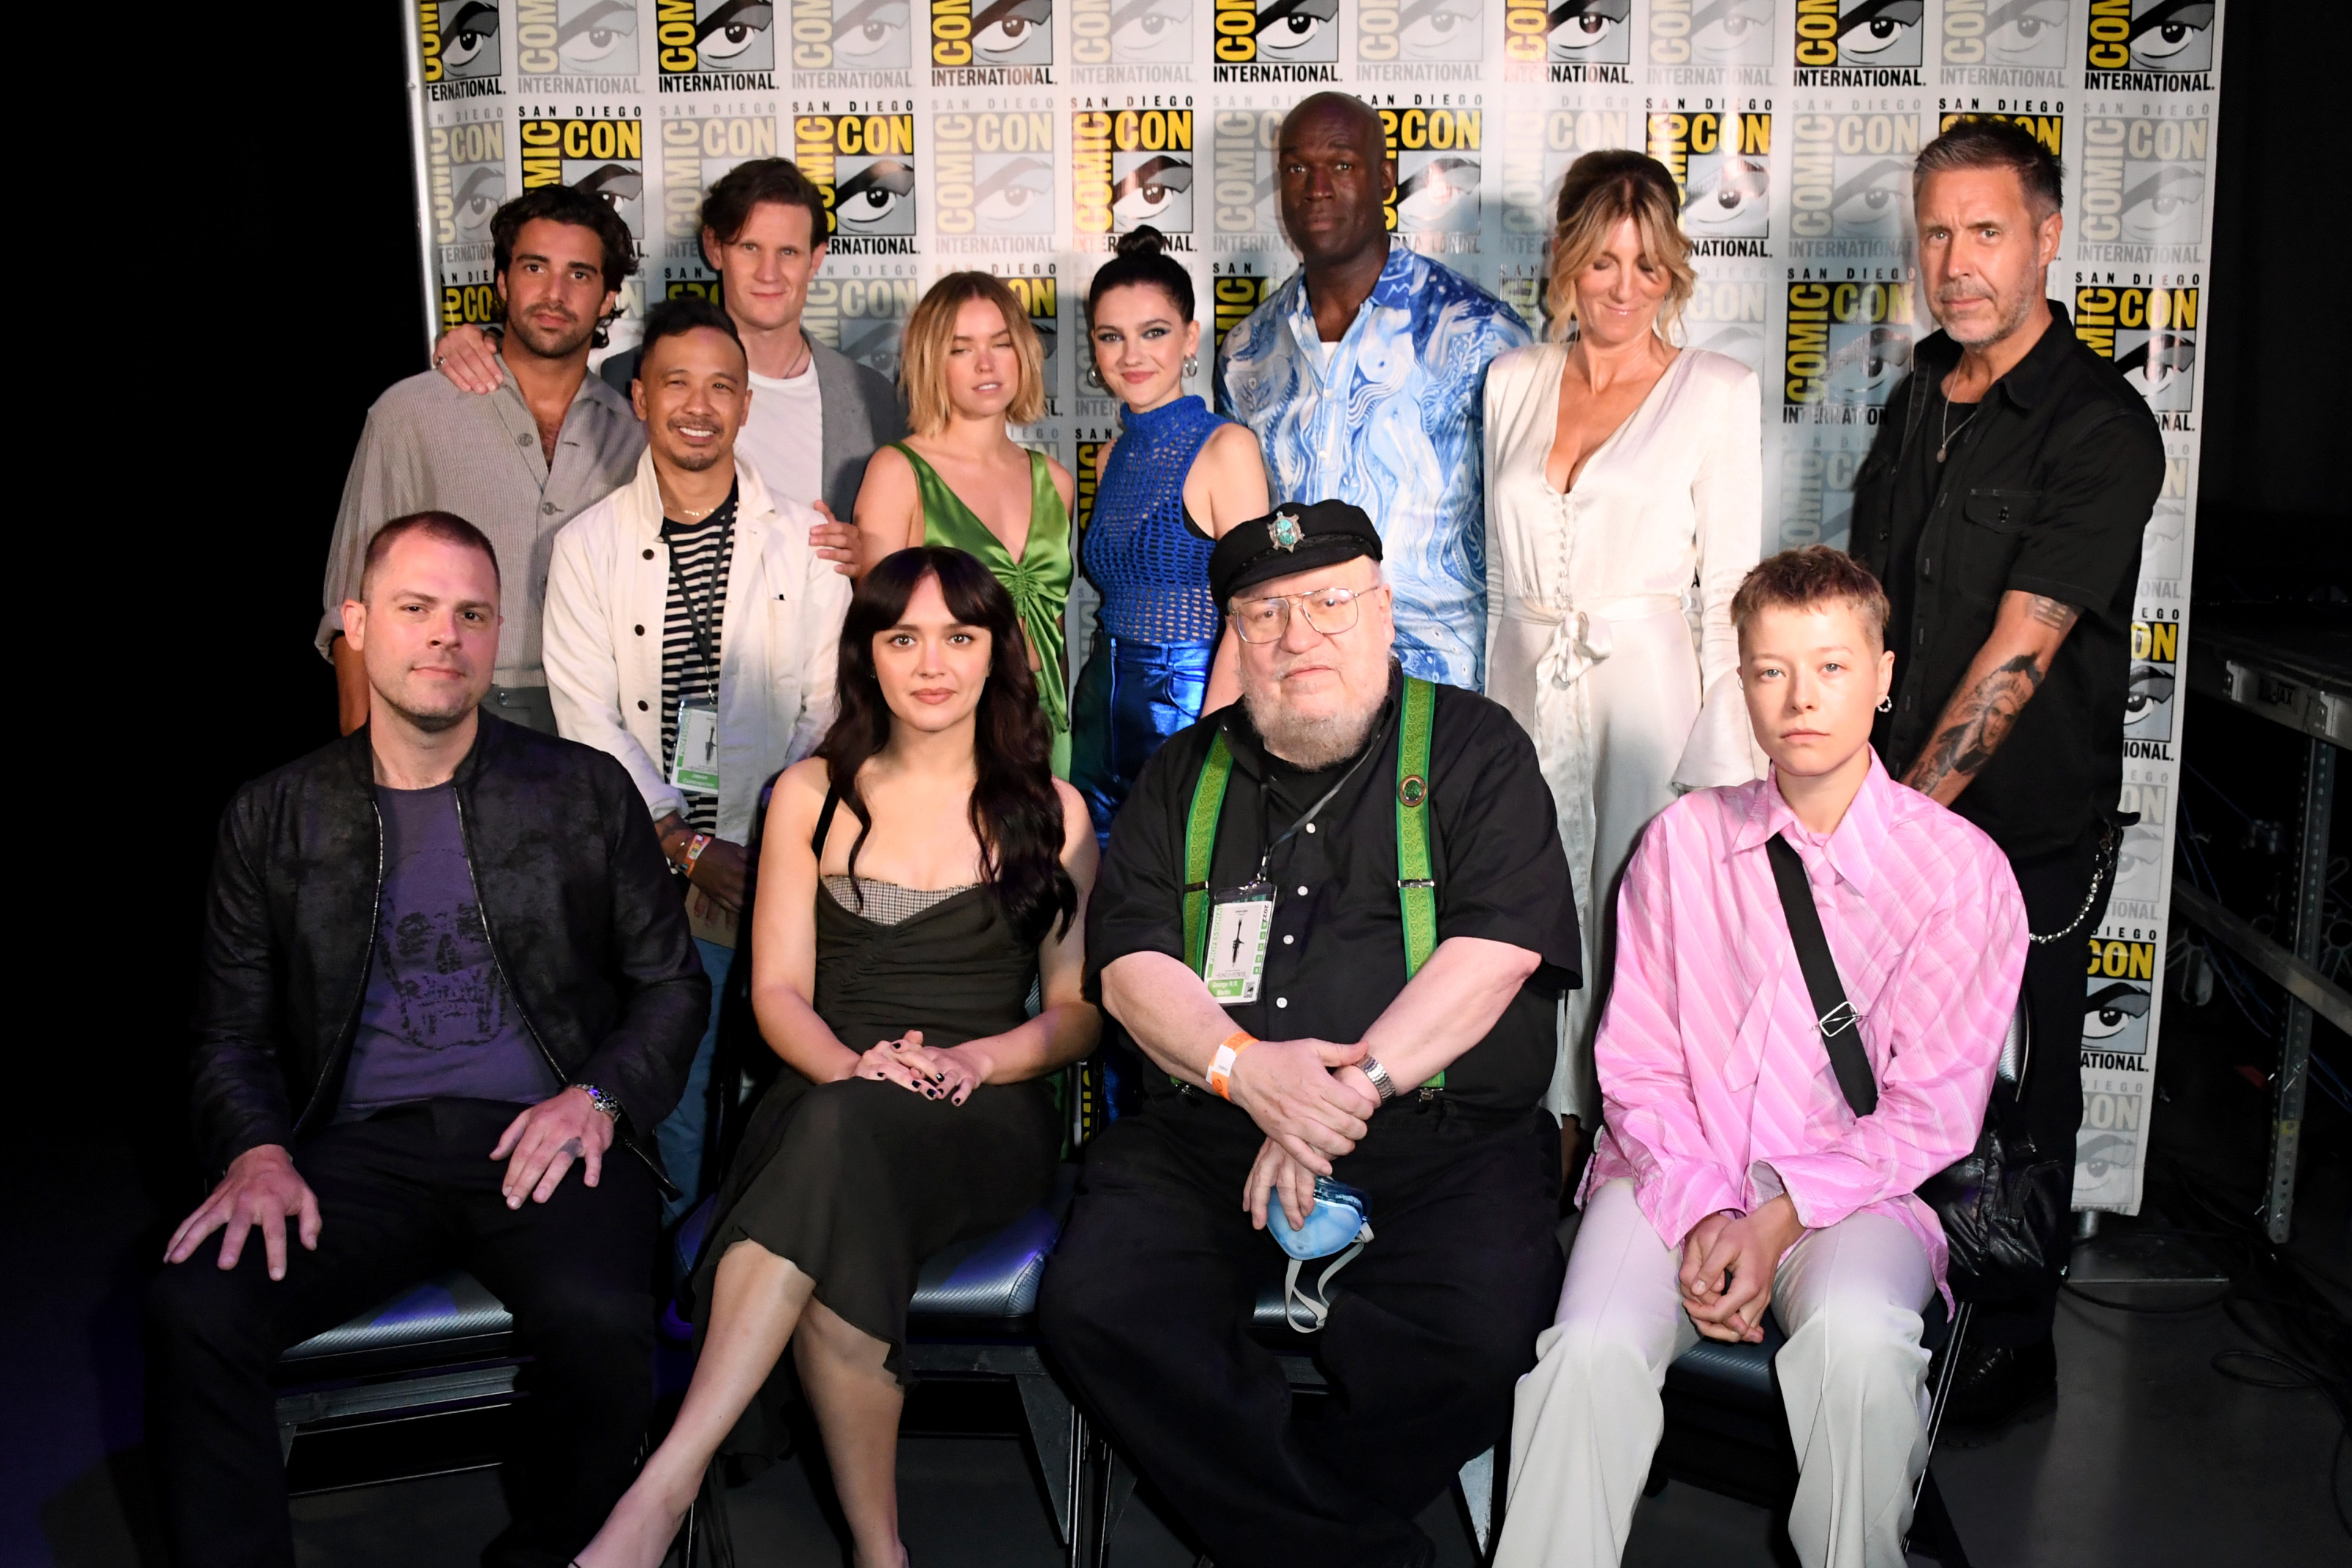 Game of Thrones: House of the Dragons Cast and Crew Interview